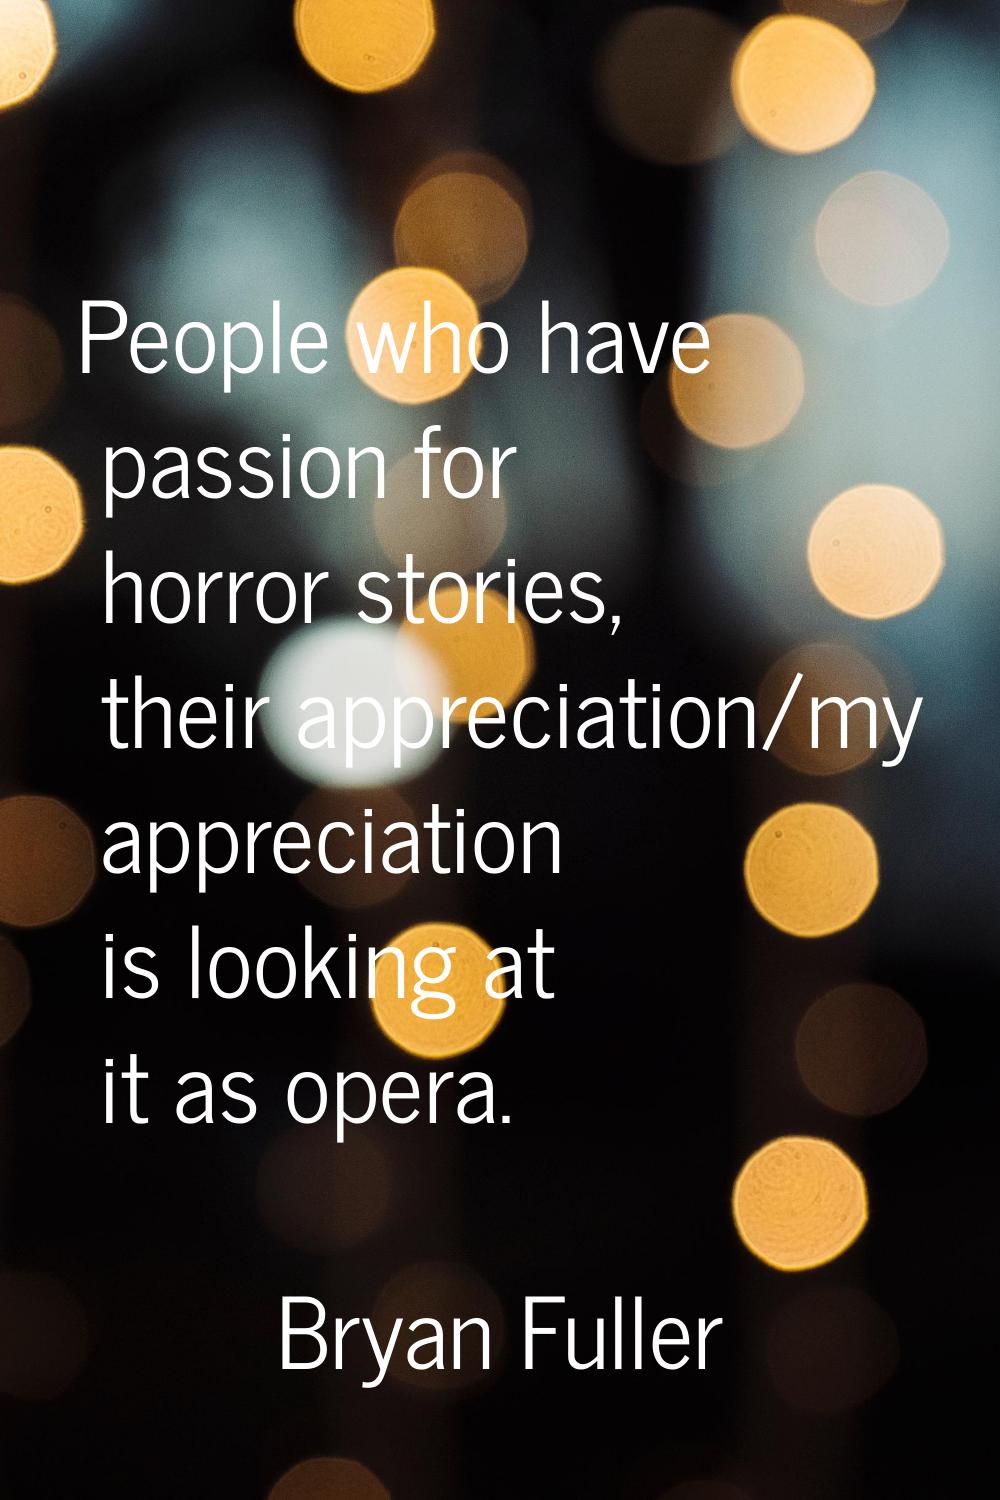 People who have passion for horror stories, their appreciation/my appreciation is looking at it as 